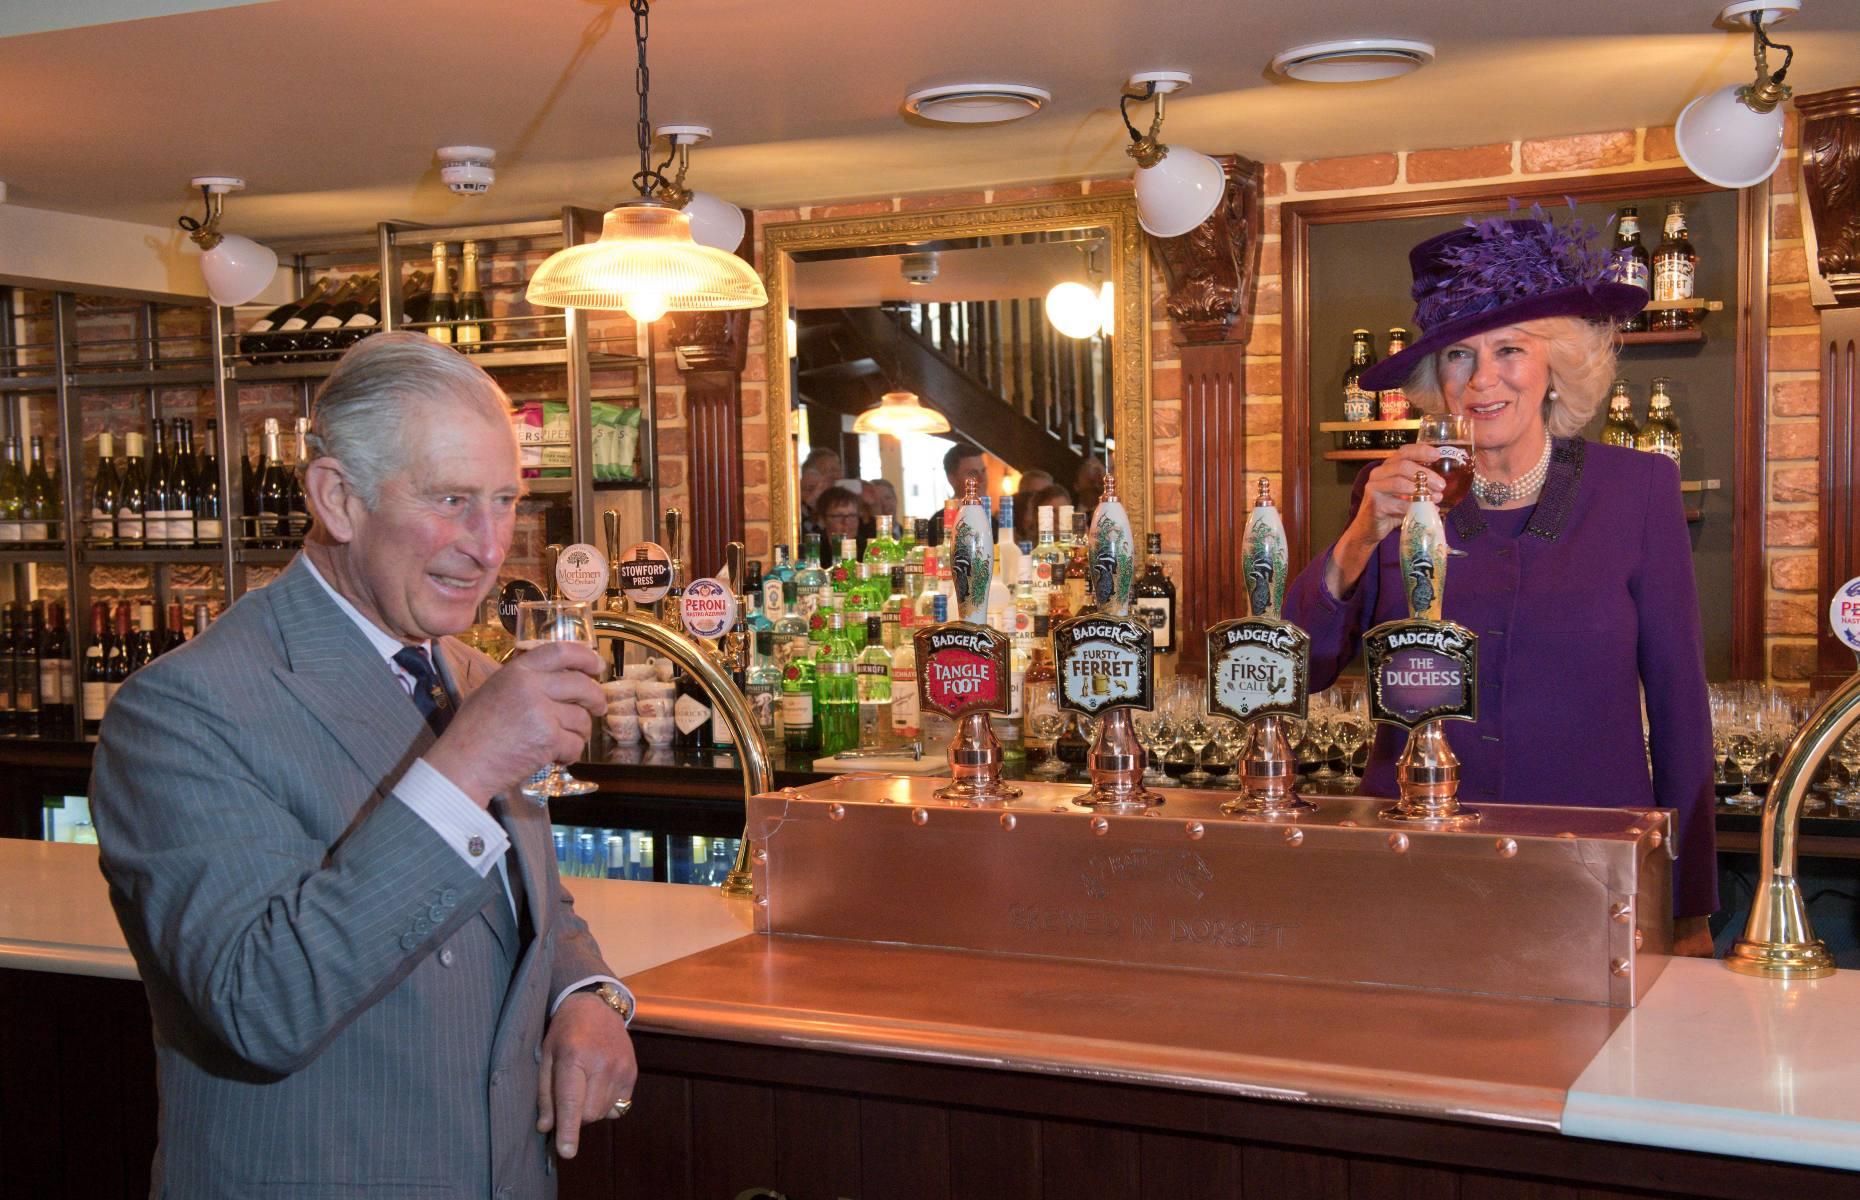 <p>While the royal party were there, the then Duke and Duchess of Cornwall popped in to <a href="https://www.duchessofcornwall.co.uk/">The Duchess of Cornwall Inn</a>, which was inspired by the Ritz in London, a favourite haunt of the Queen Mother’s. The Duchess even found time to try her hand at pulling a pint, although the Prince's favourite daily tipple, according to <a href="https://www.thedrinksbusiness.com/2023/04/king-charles-takes-his-favourite-drink-everywhere-with-him/">reports</a>, is a dry martini.  </p>